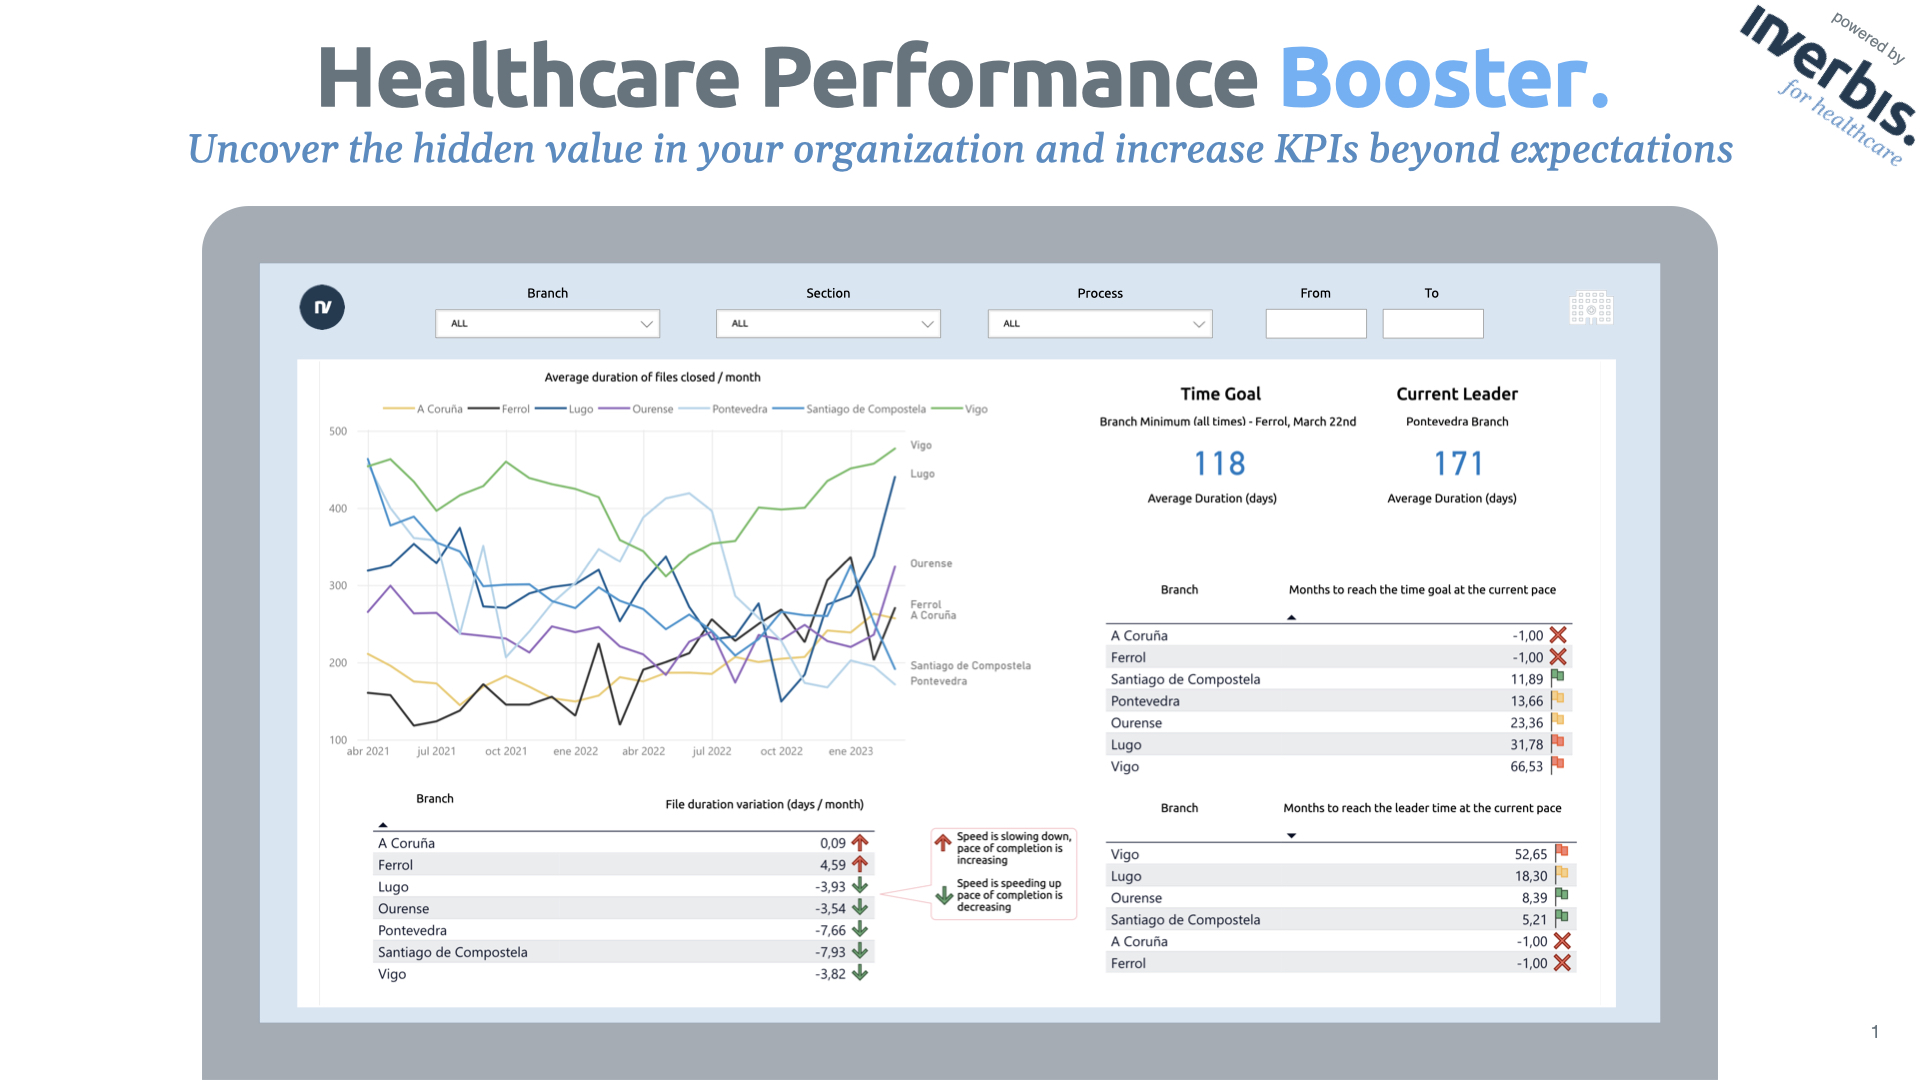 Performance Booster for Healthcare by Inverbis